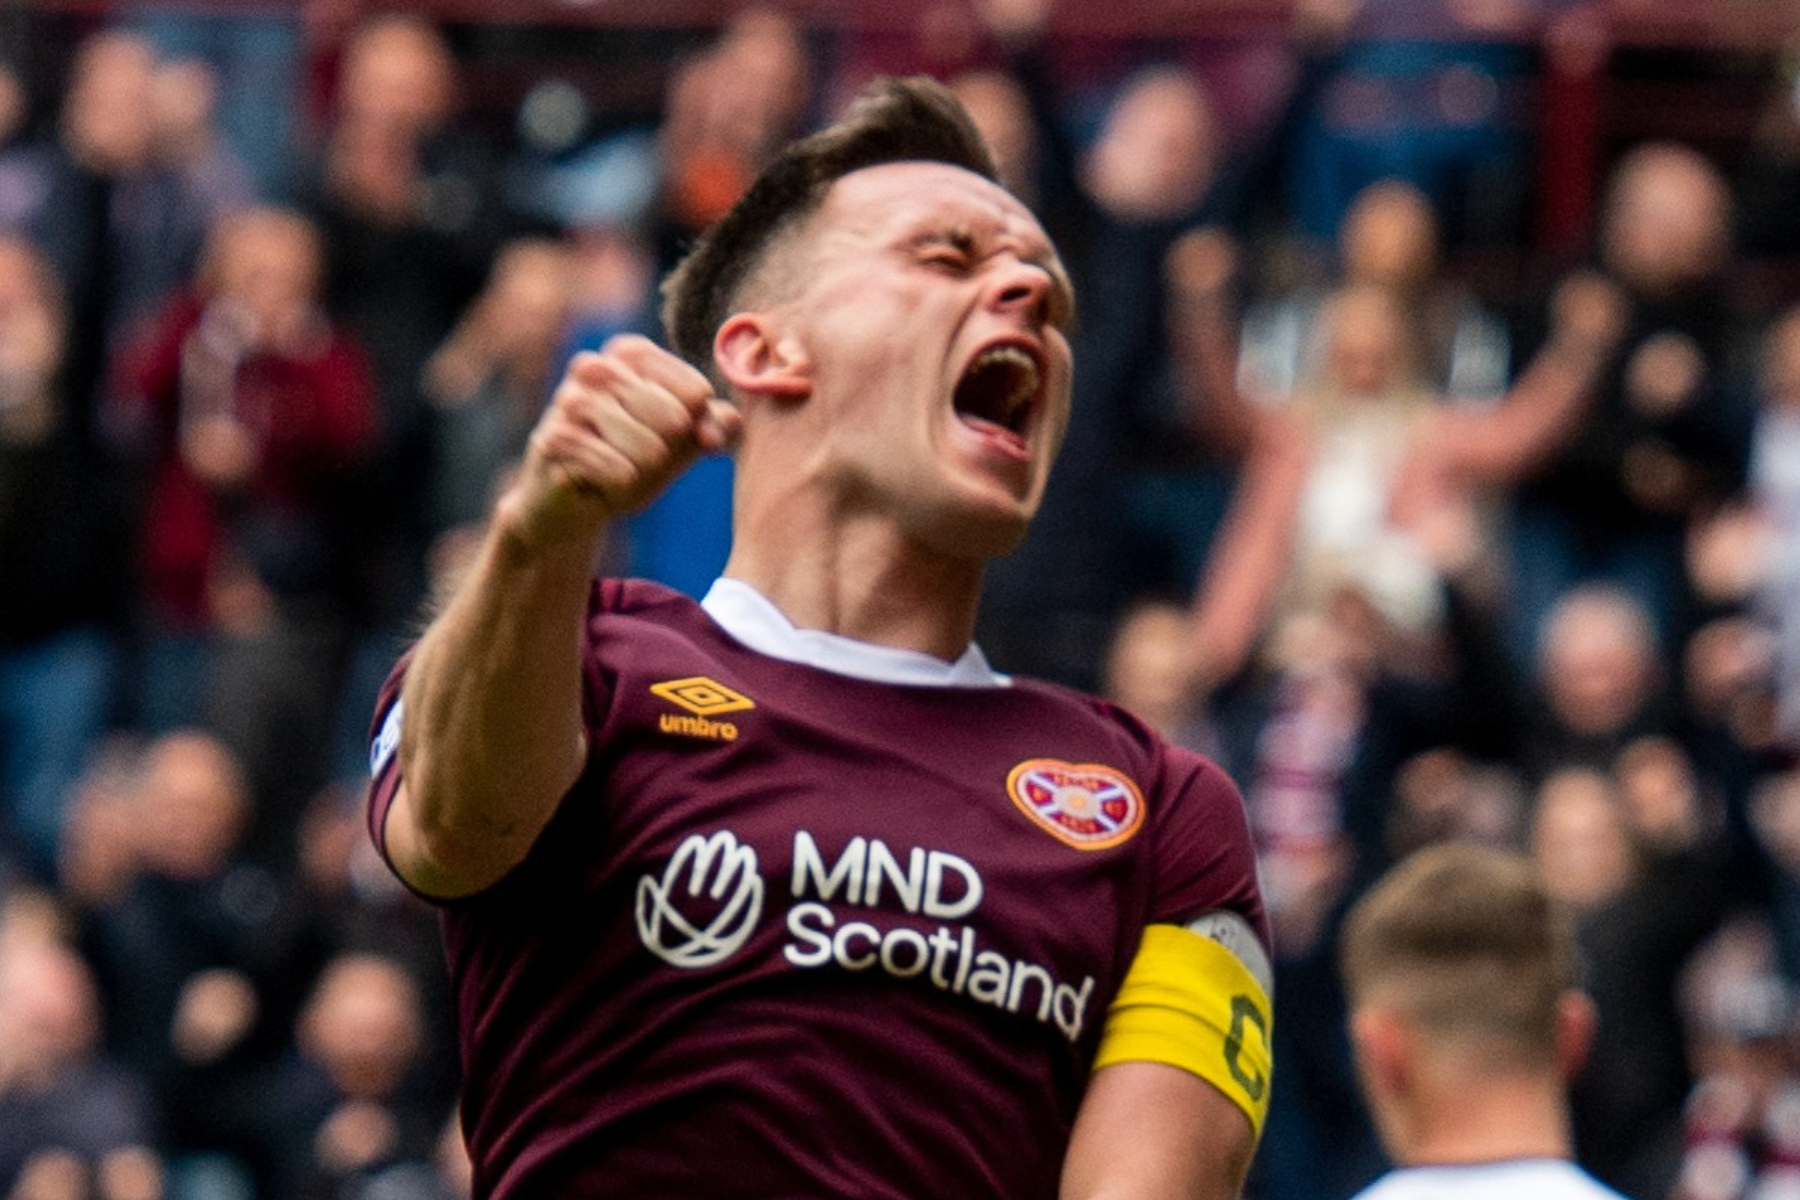 Hearts 6 Ross County 1: Instant reaction to the burning issues